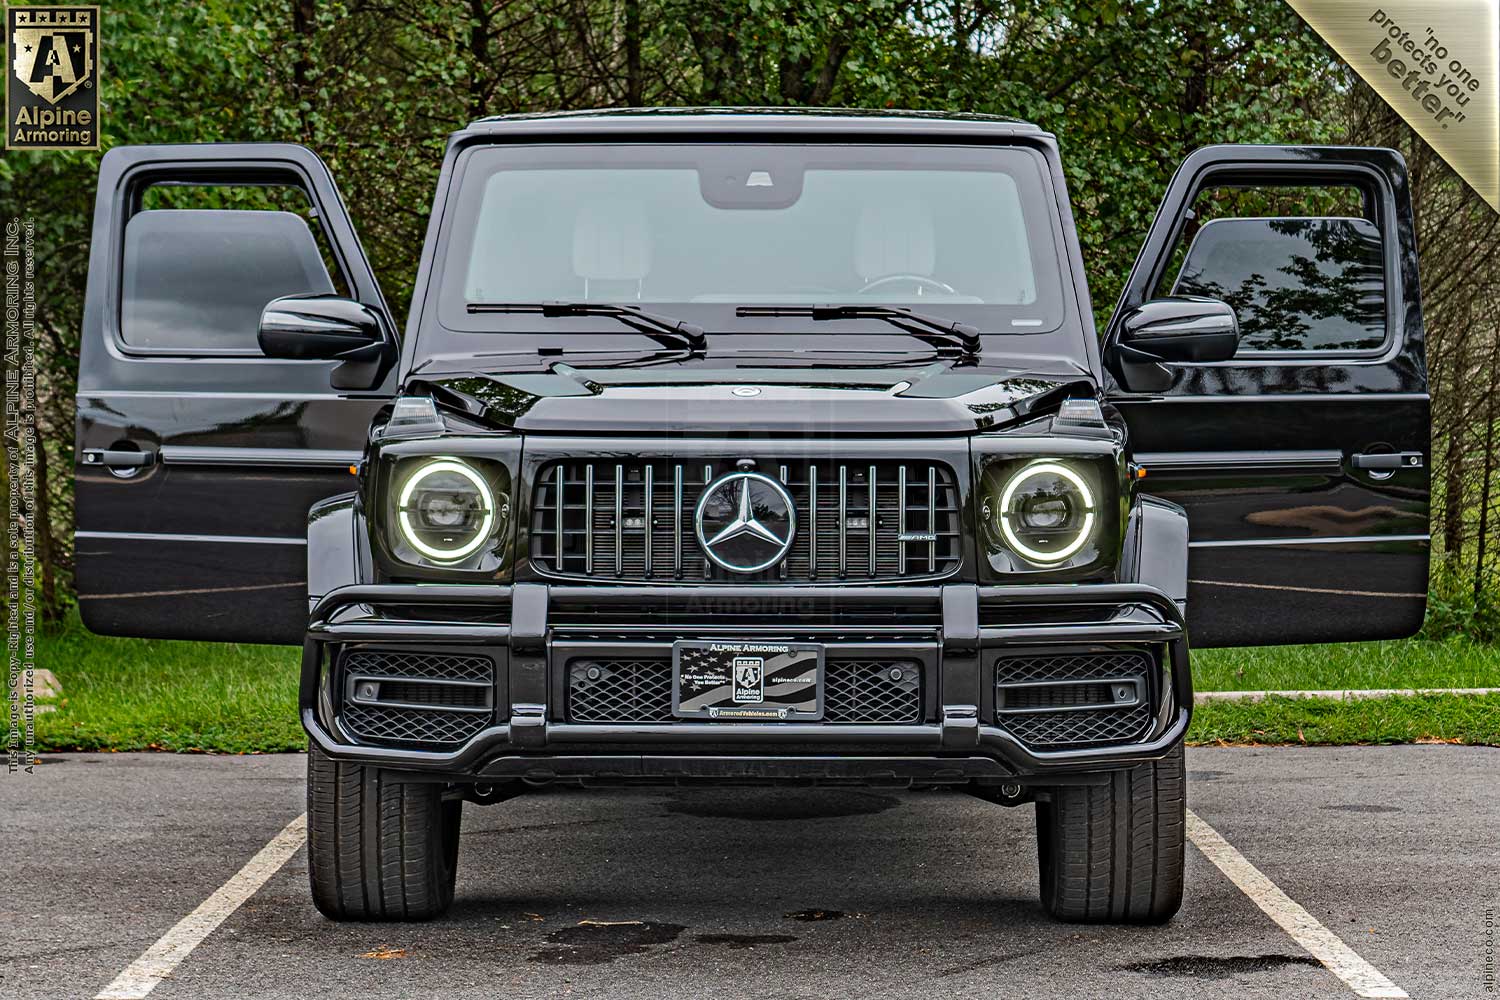 New Inventory armored Mercedes-Benz G63 Level A9/B6+  Exterior & Interior Images VIN:7379